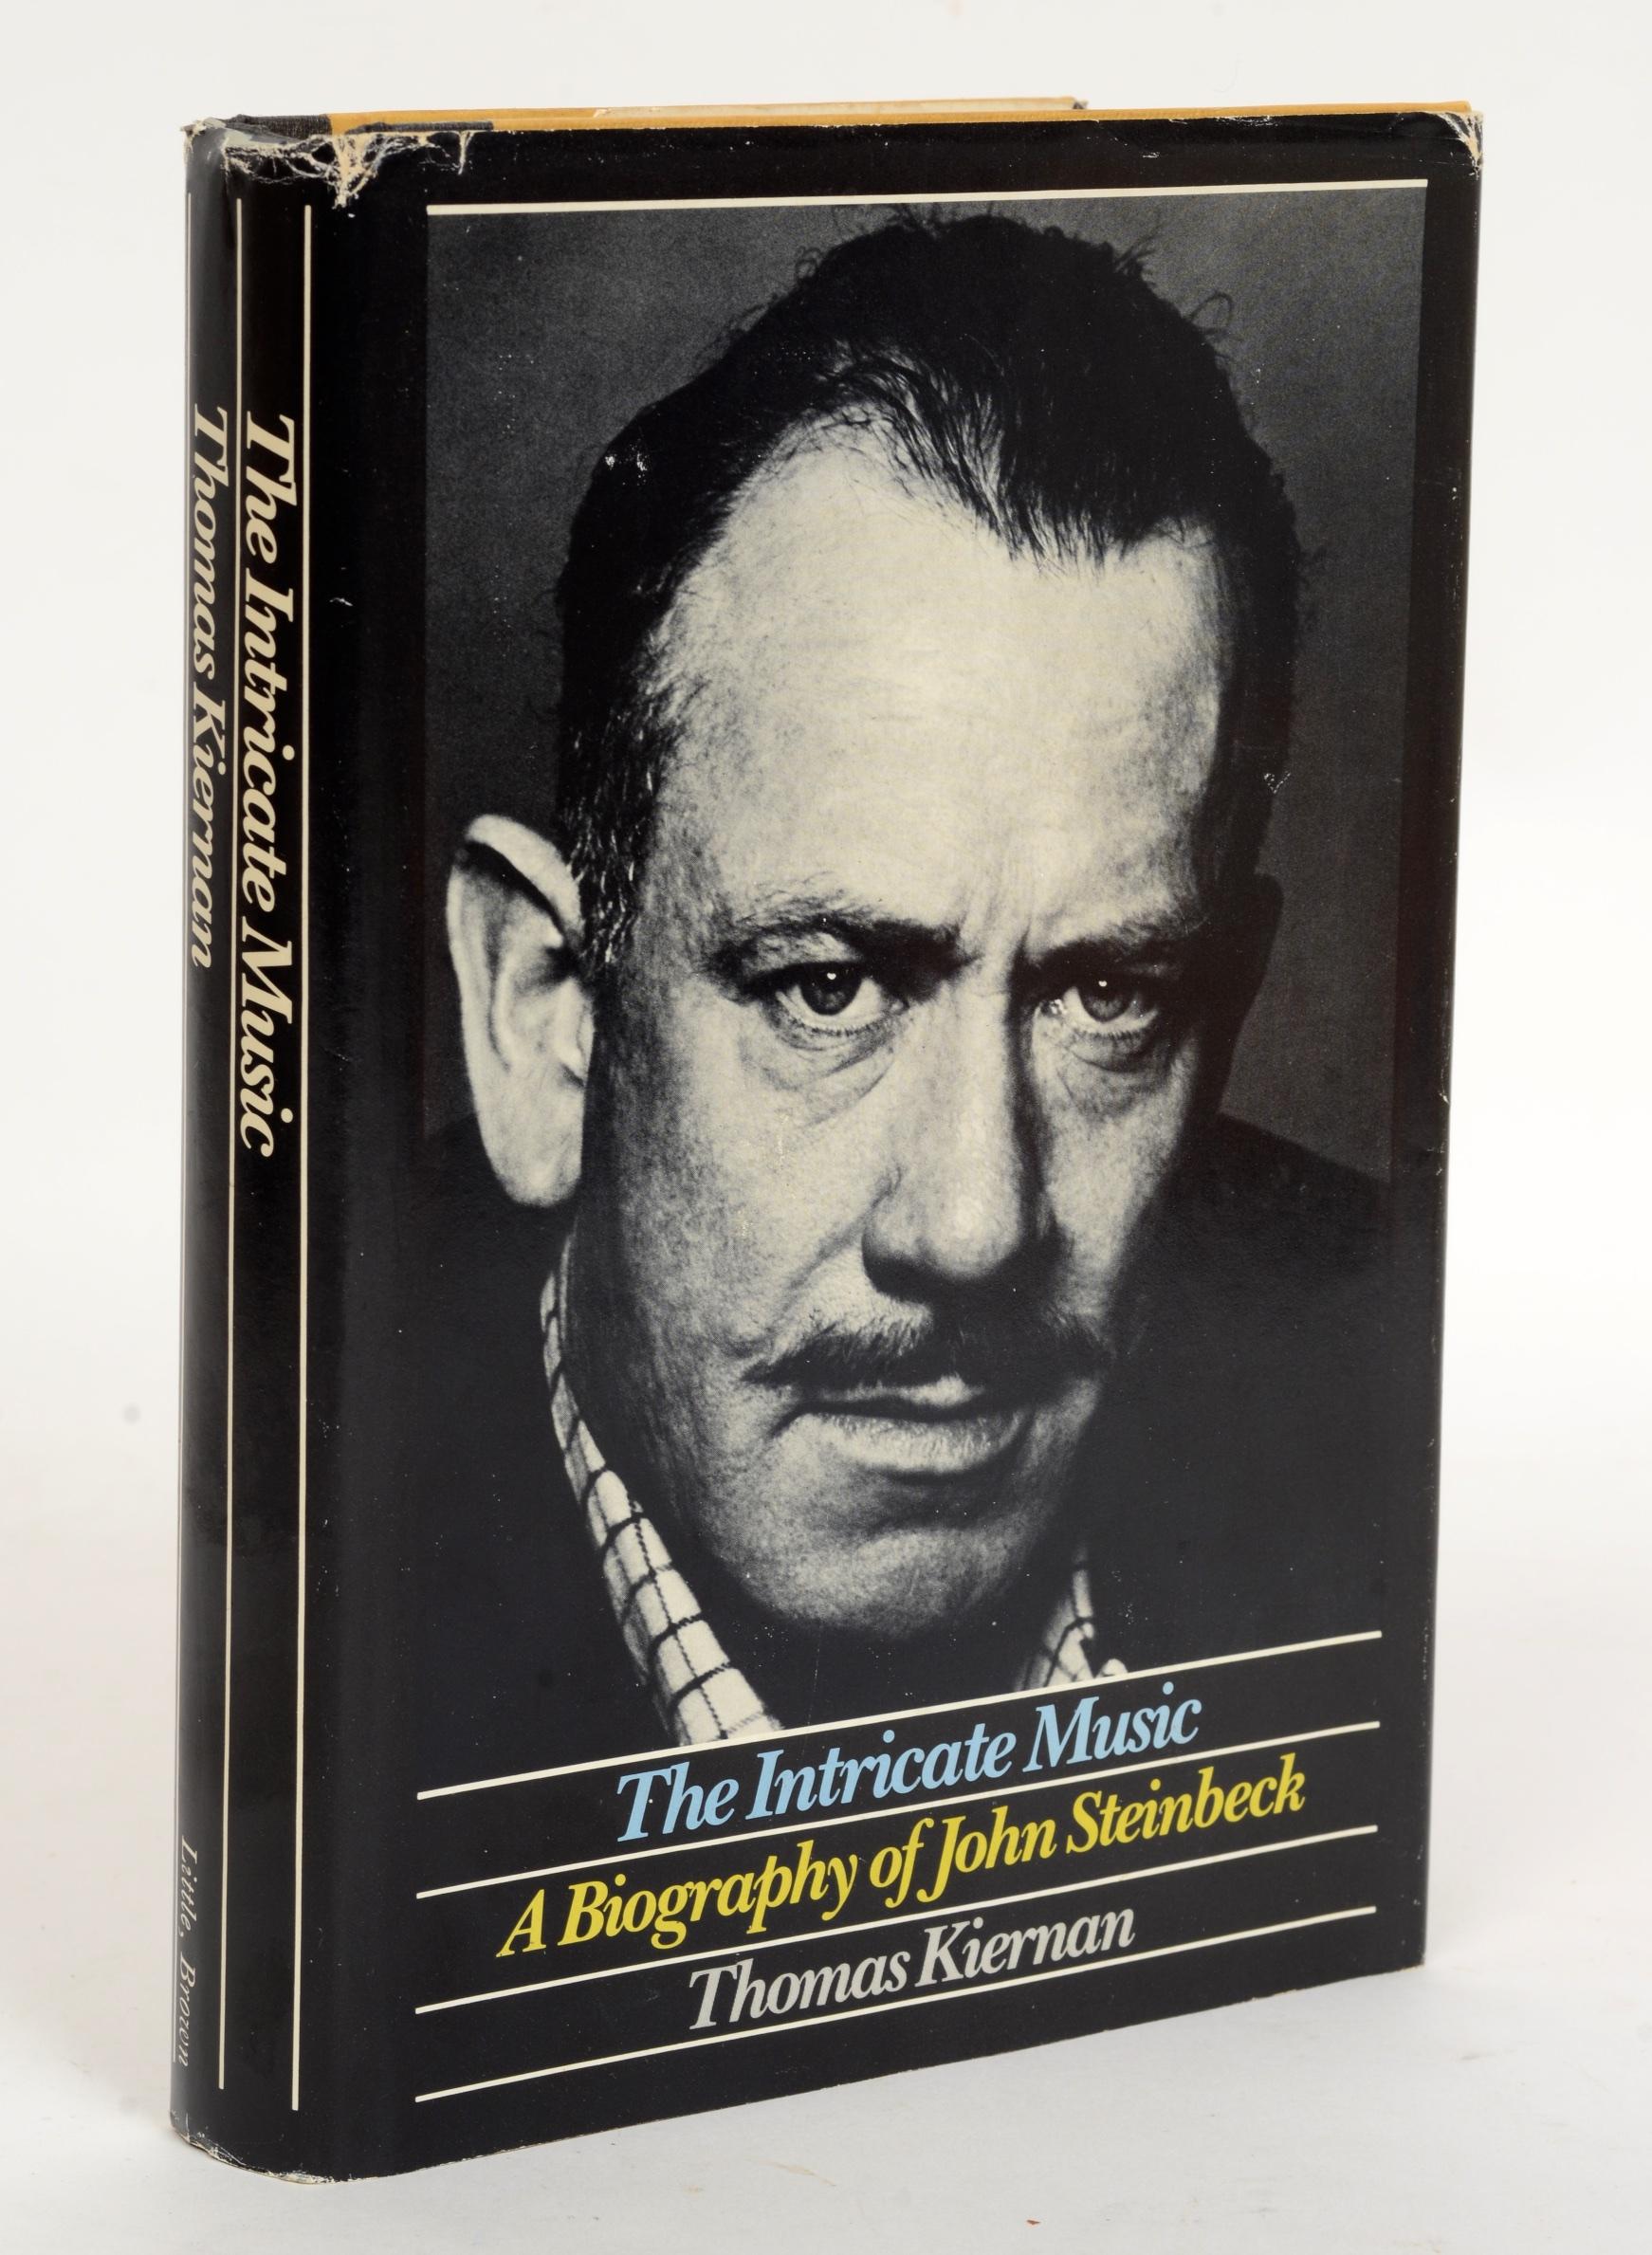 The Intricate Music: A biography of John Steinbeck by Thomas Kiernan. Little Brown & Co, Boston, 1979. Signed and Stated First Edition hardcover with dust jacket. John Ernst Steinbeck Jr. (1902- 1968) was an American author. He won the 1962 Nobel